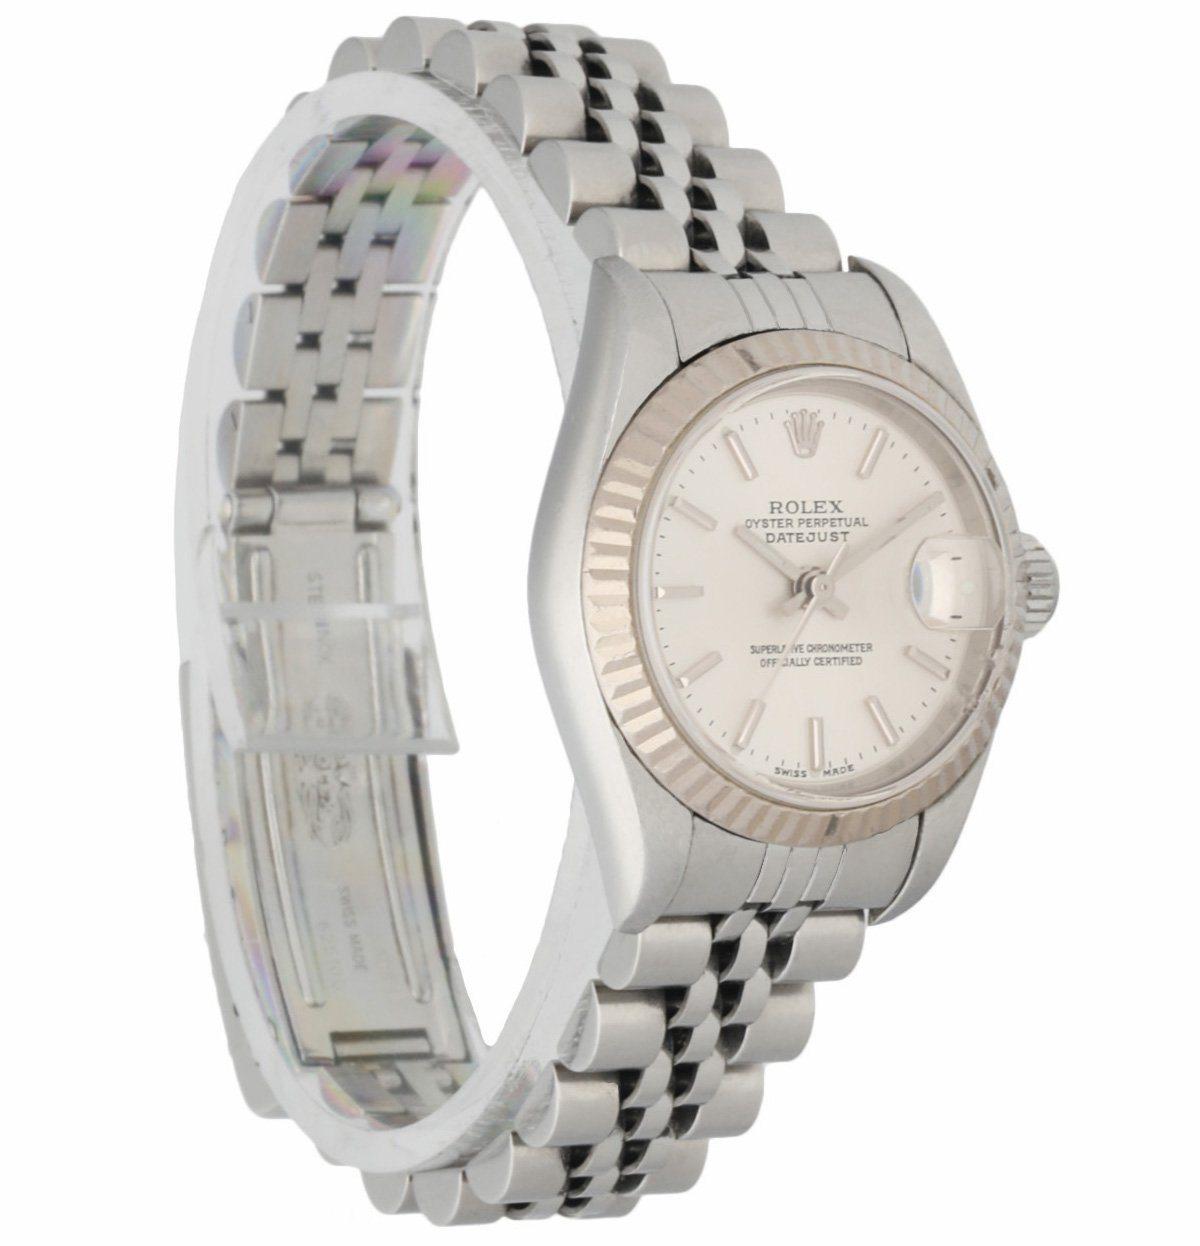 Rolex Oyster Perpetual Datejust 79174 Ladies Watch. 26mm stainless steel case. 18k white gold fluted bezel. Silver dial with luminous steel hands and index hour markers. Stainless steel Jubilee bracelet with fold over clasp. Will fit up to 6-inch